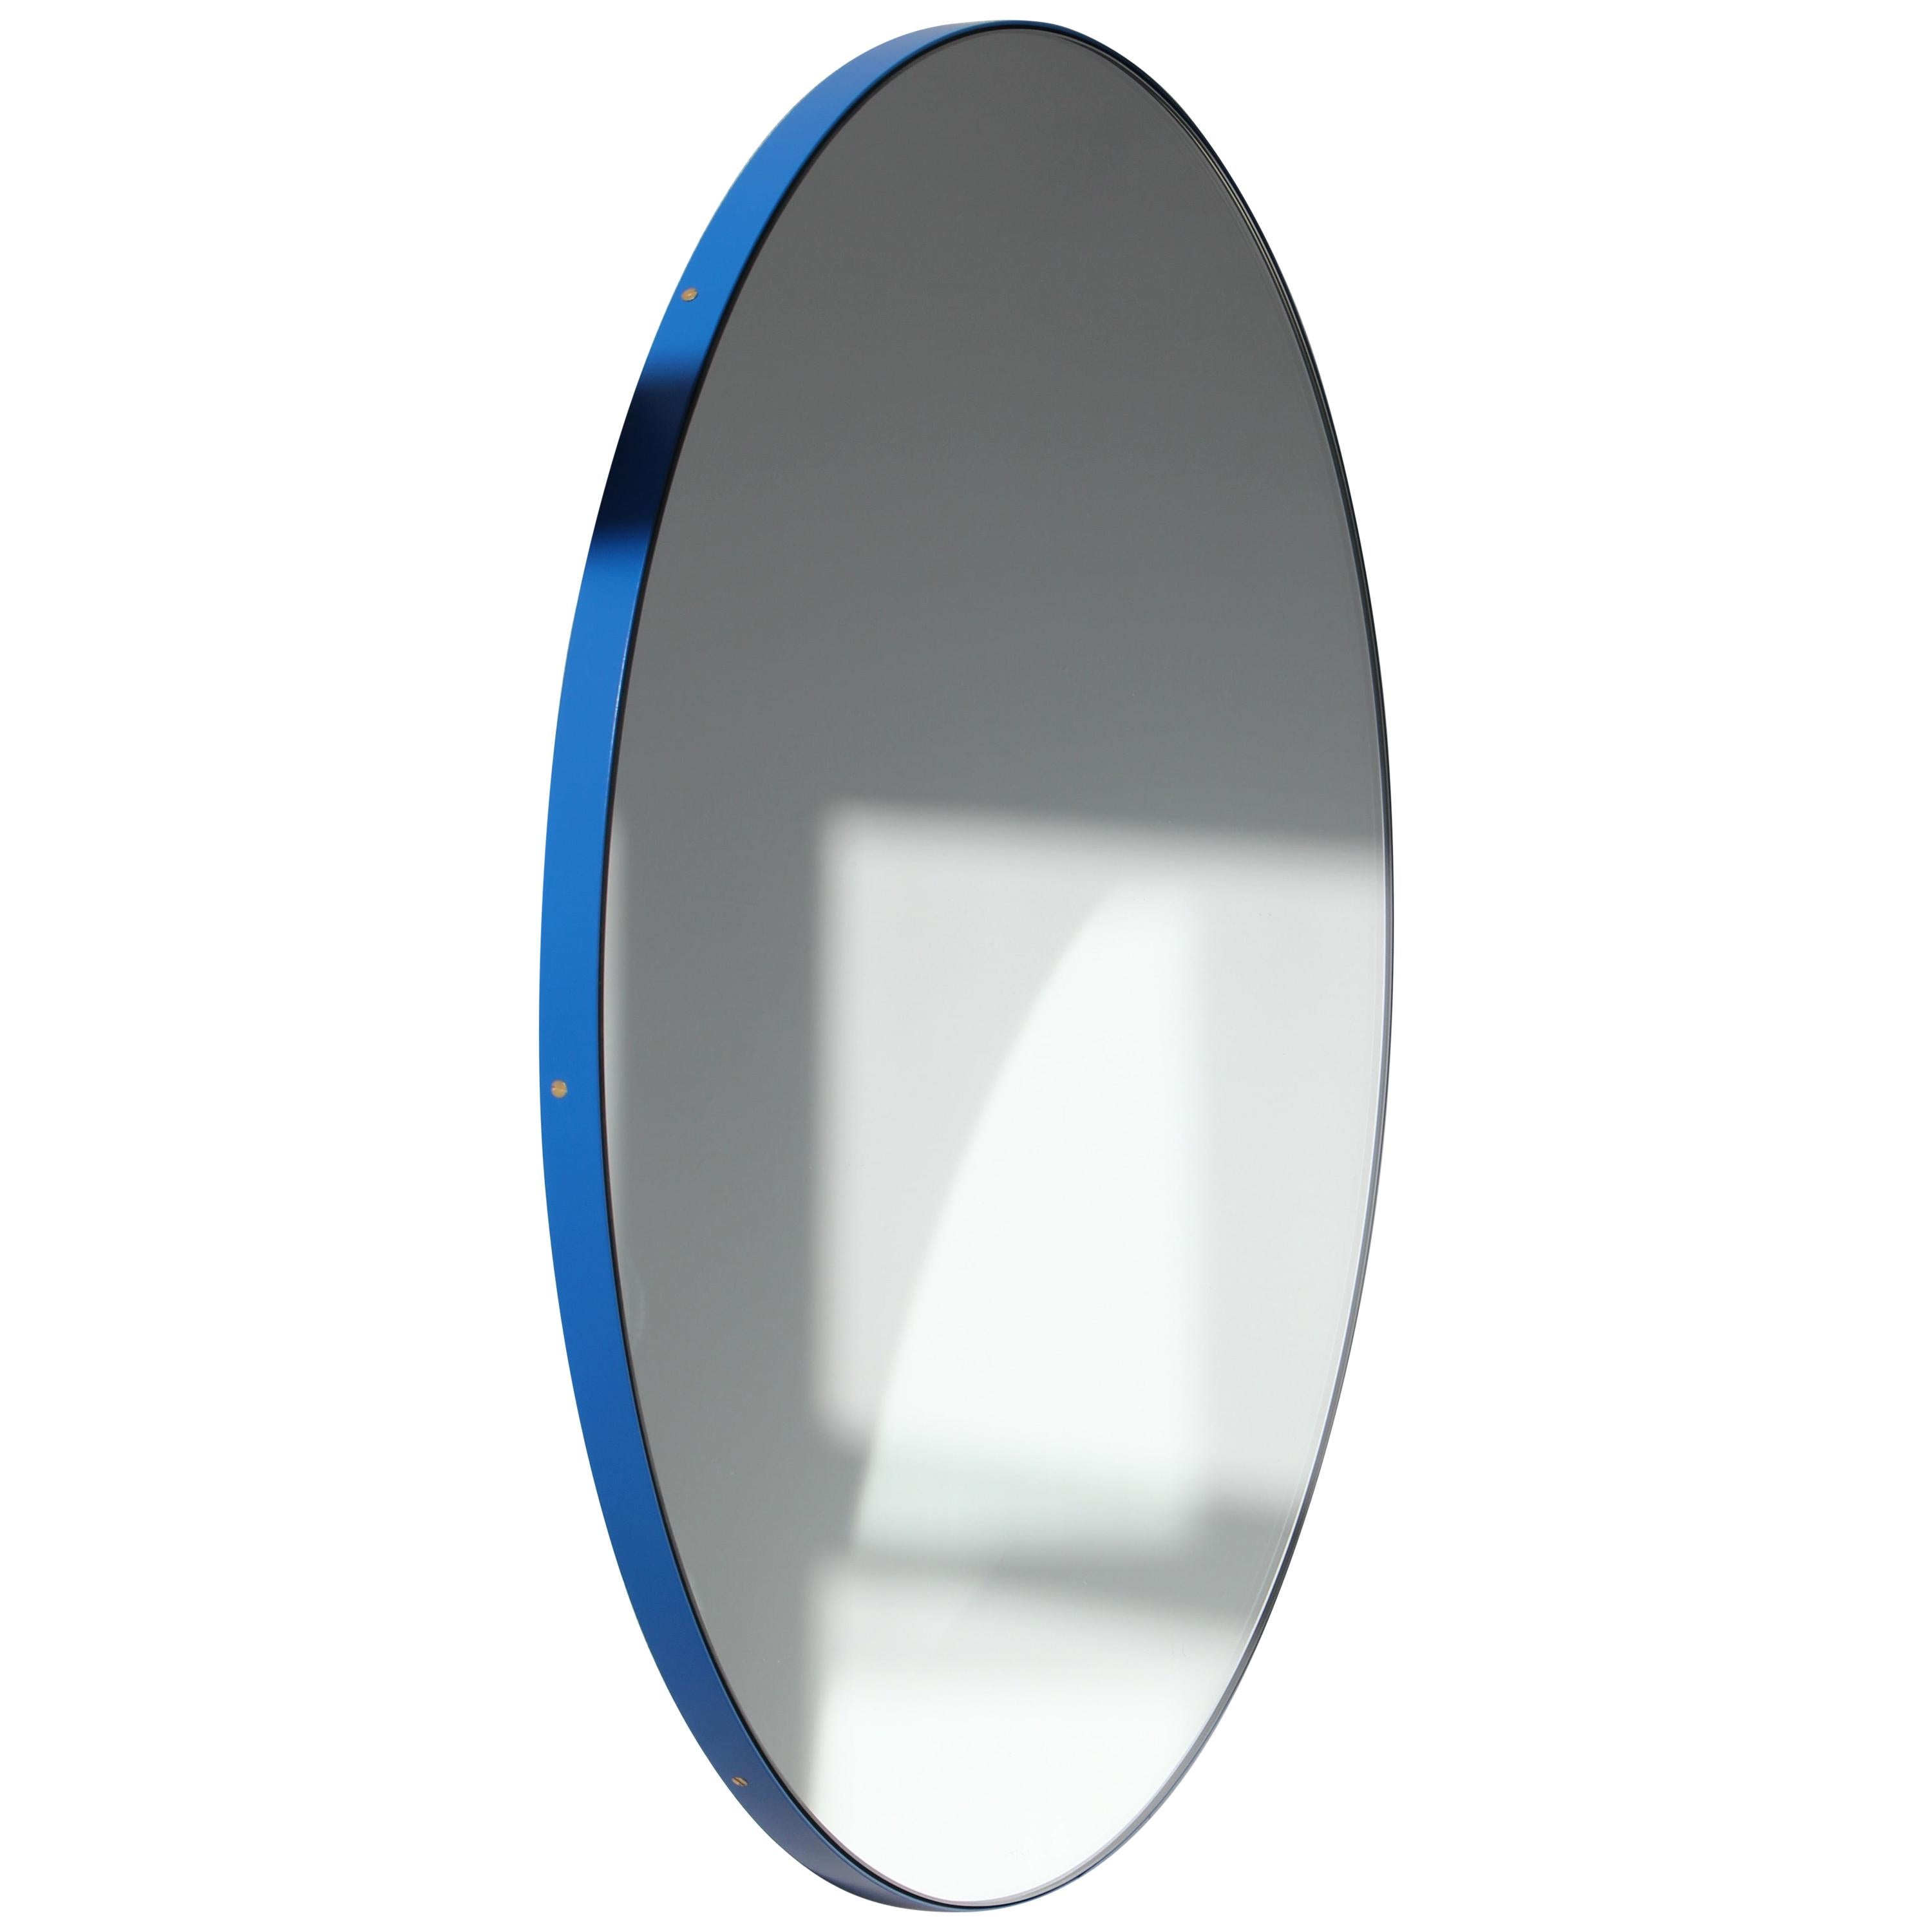 Orbis Round Modern Mirror with Blue Frame, Large For Sale